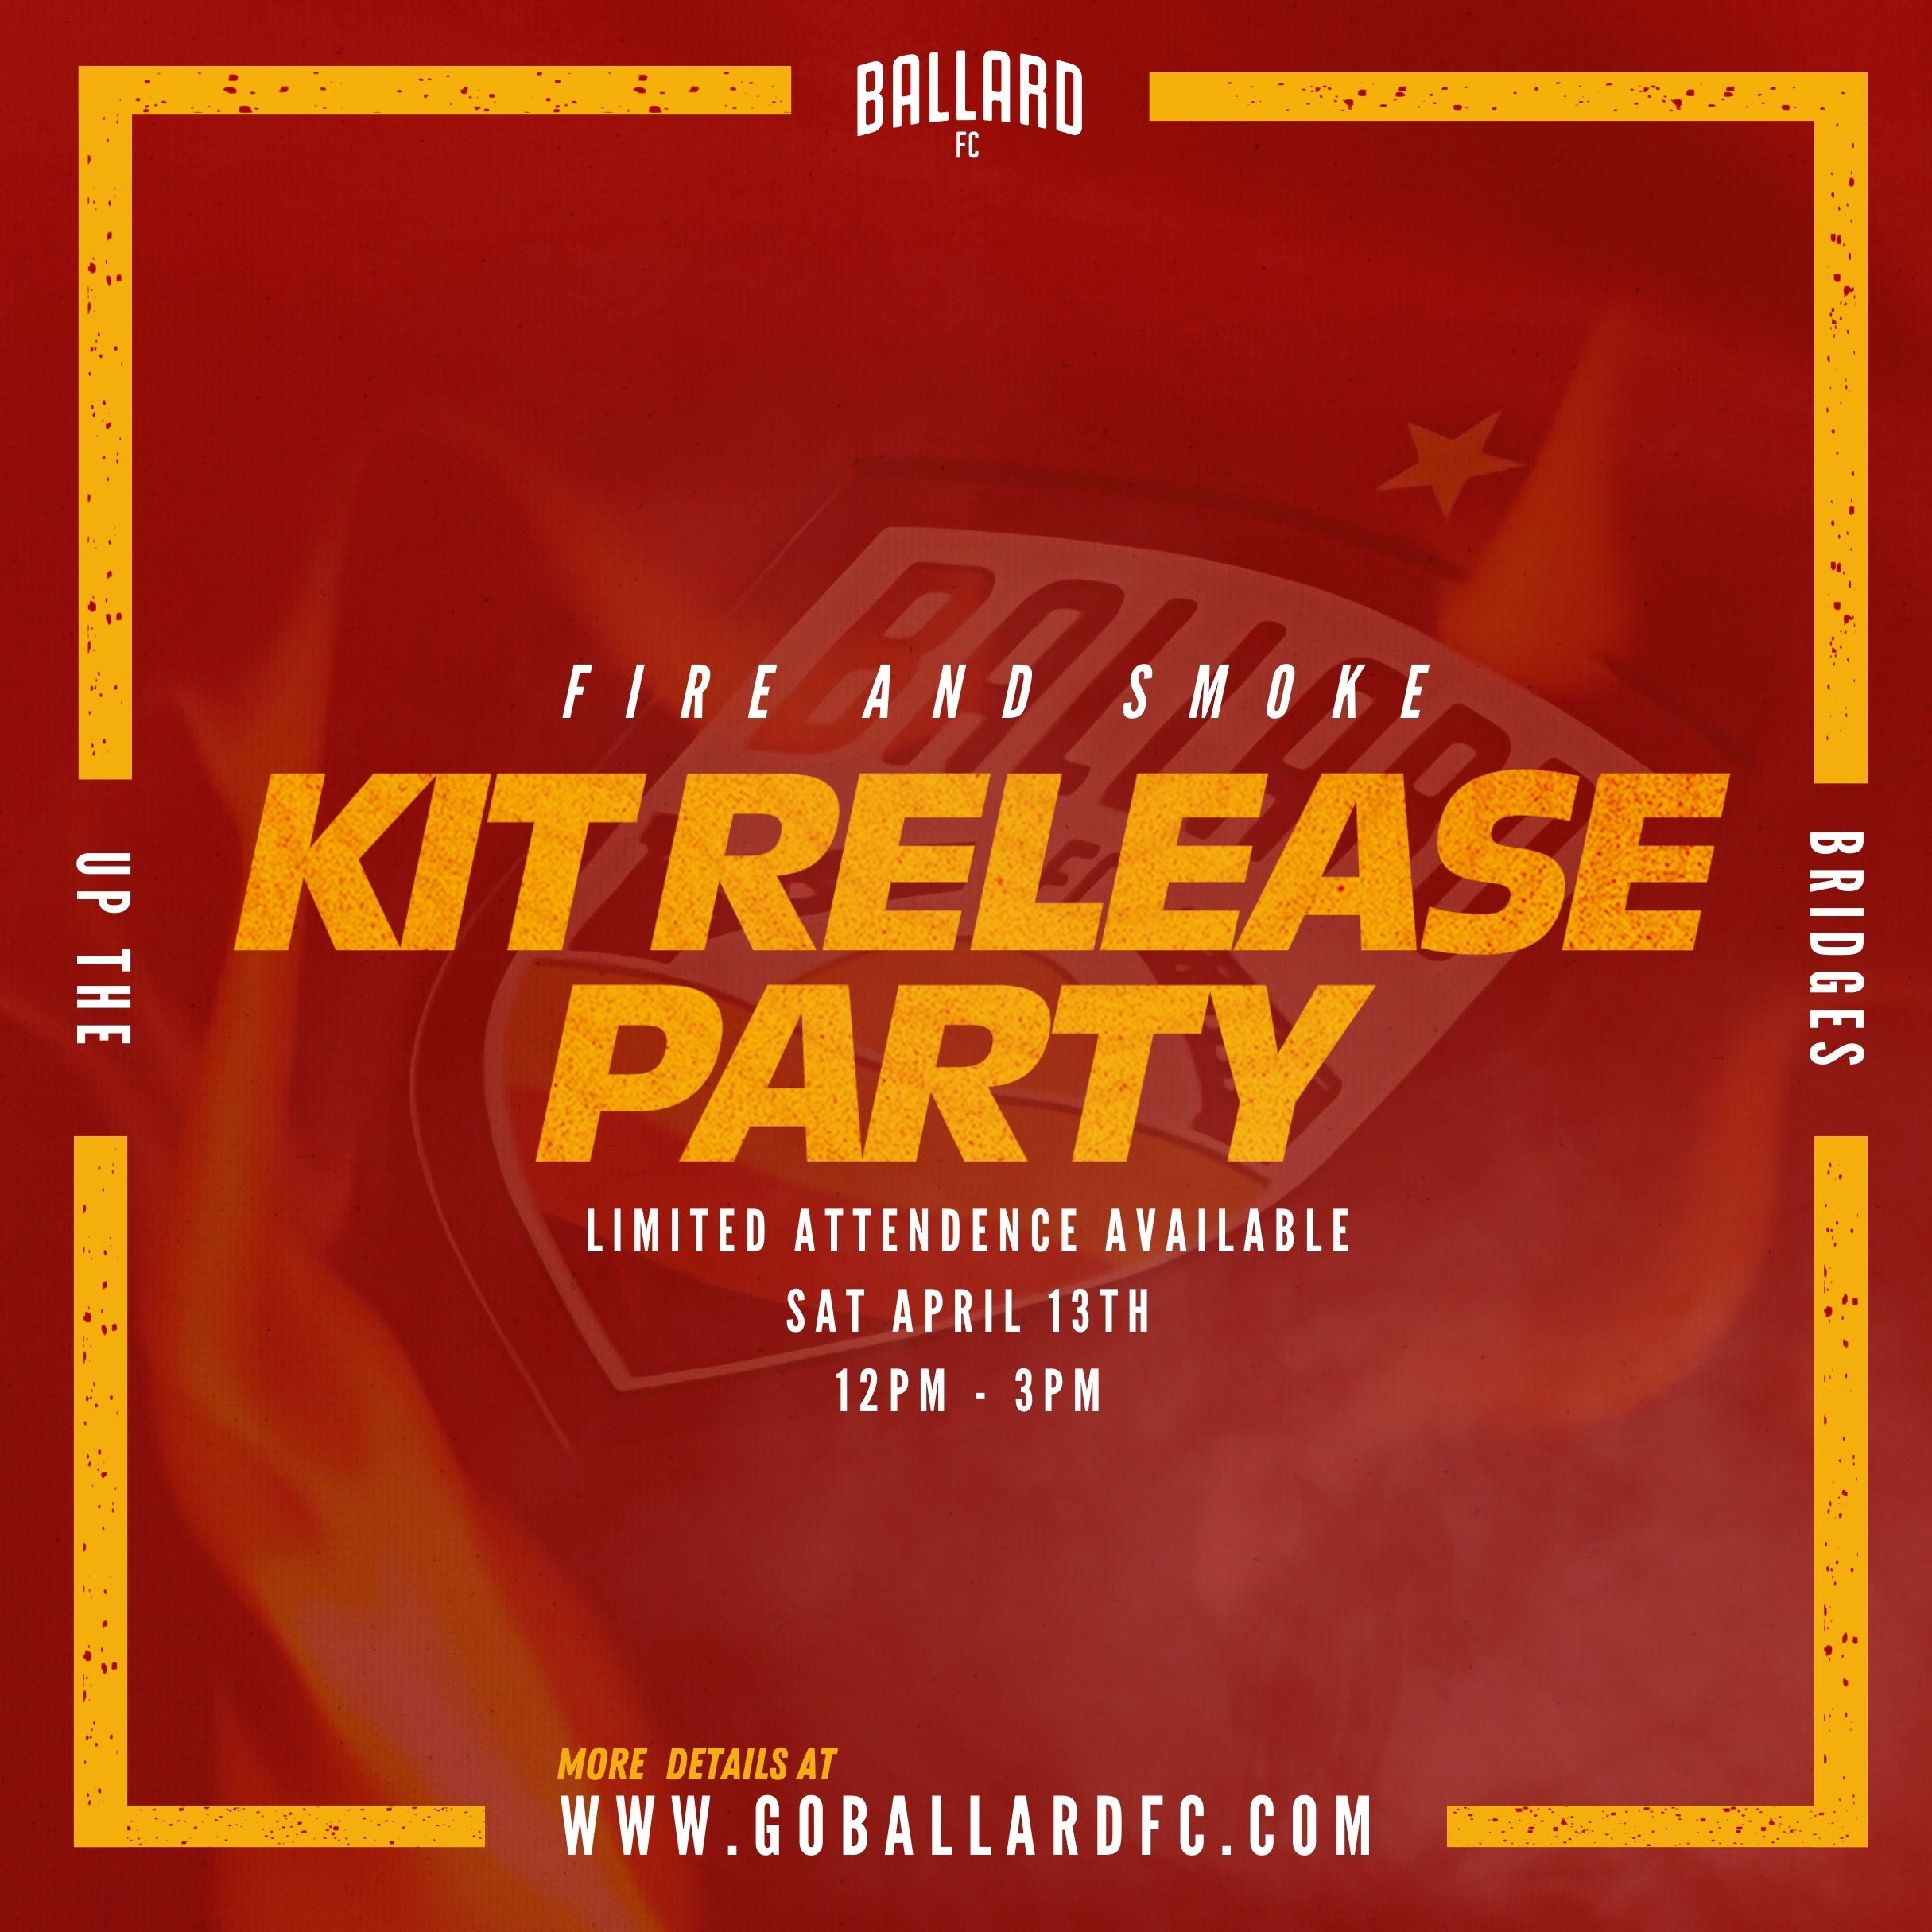 Ballard FC Announce Kit Release Party on April 13th featured image